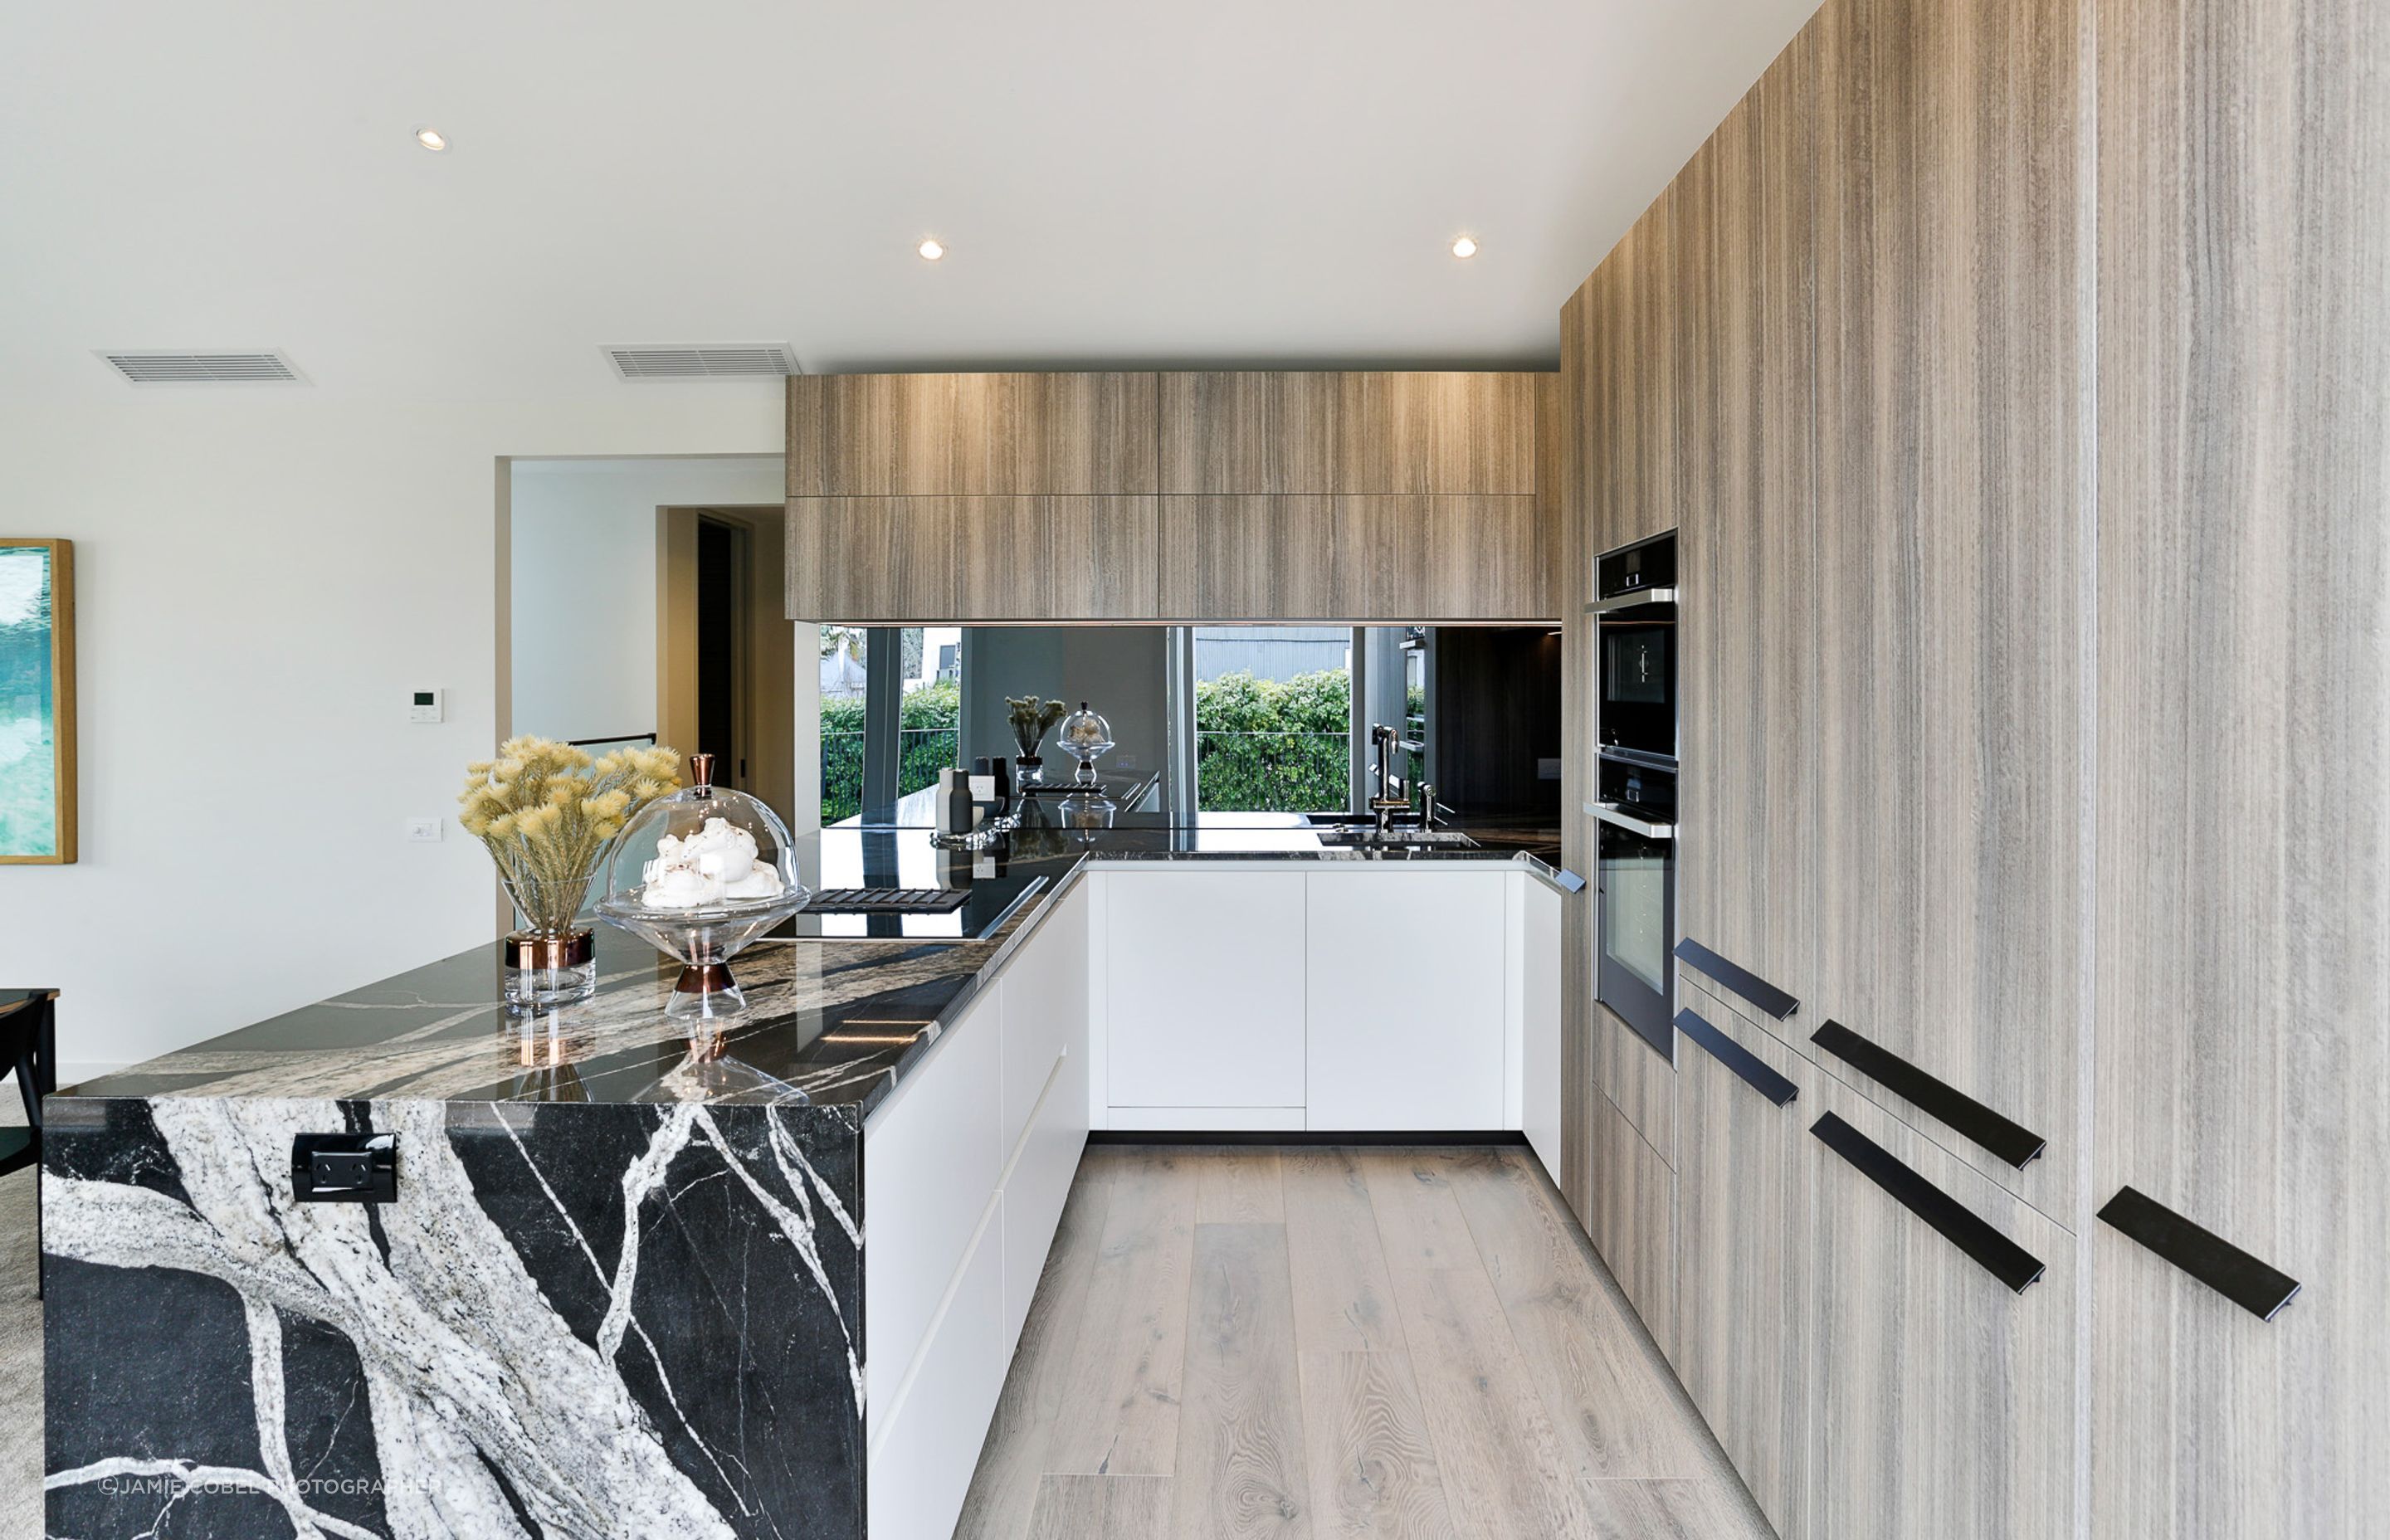 Exquisite feature Melamine Thermostructure Cabinetry by Arrital and lower Melamine Supermatt Bianco cabnetry by Arrital. With a Skyfall Granite top by Granite Workshop and Smokey Mirror splashback.